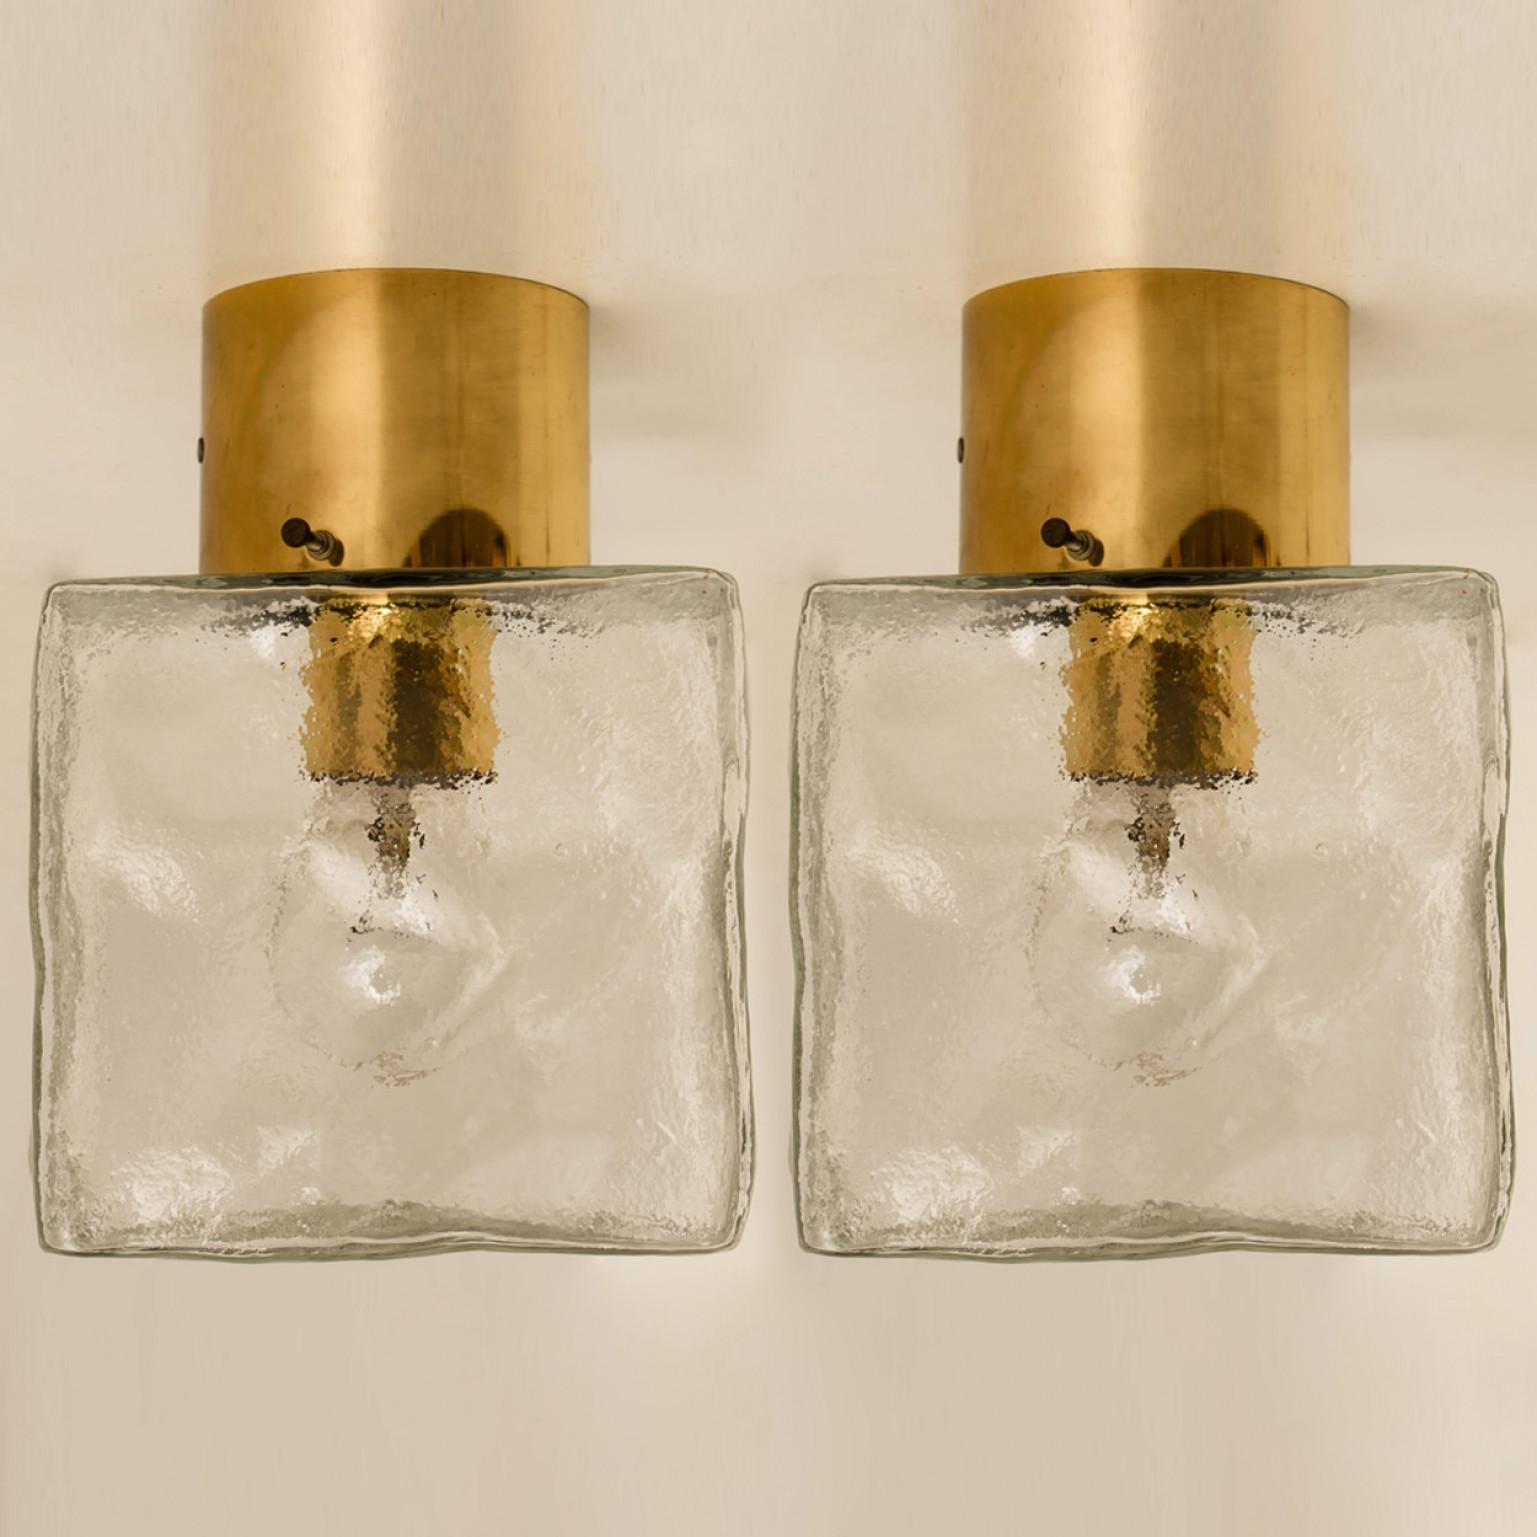 Mid-Century Modern 1 of the 3 Square Glass and Brass Light Fixtures by J.T. Kalmar, Austria For Sale